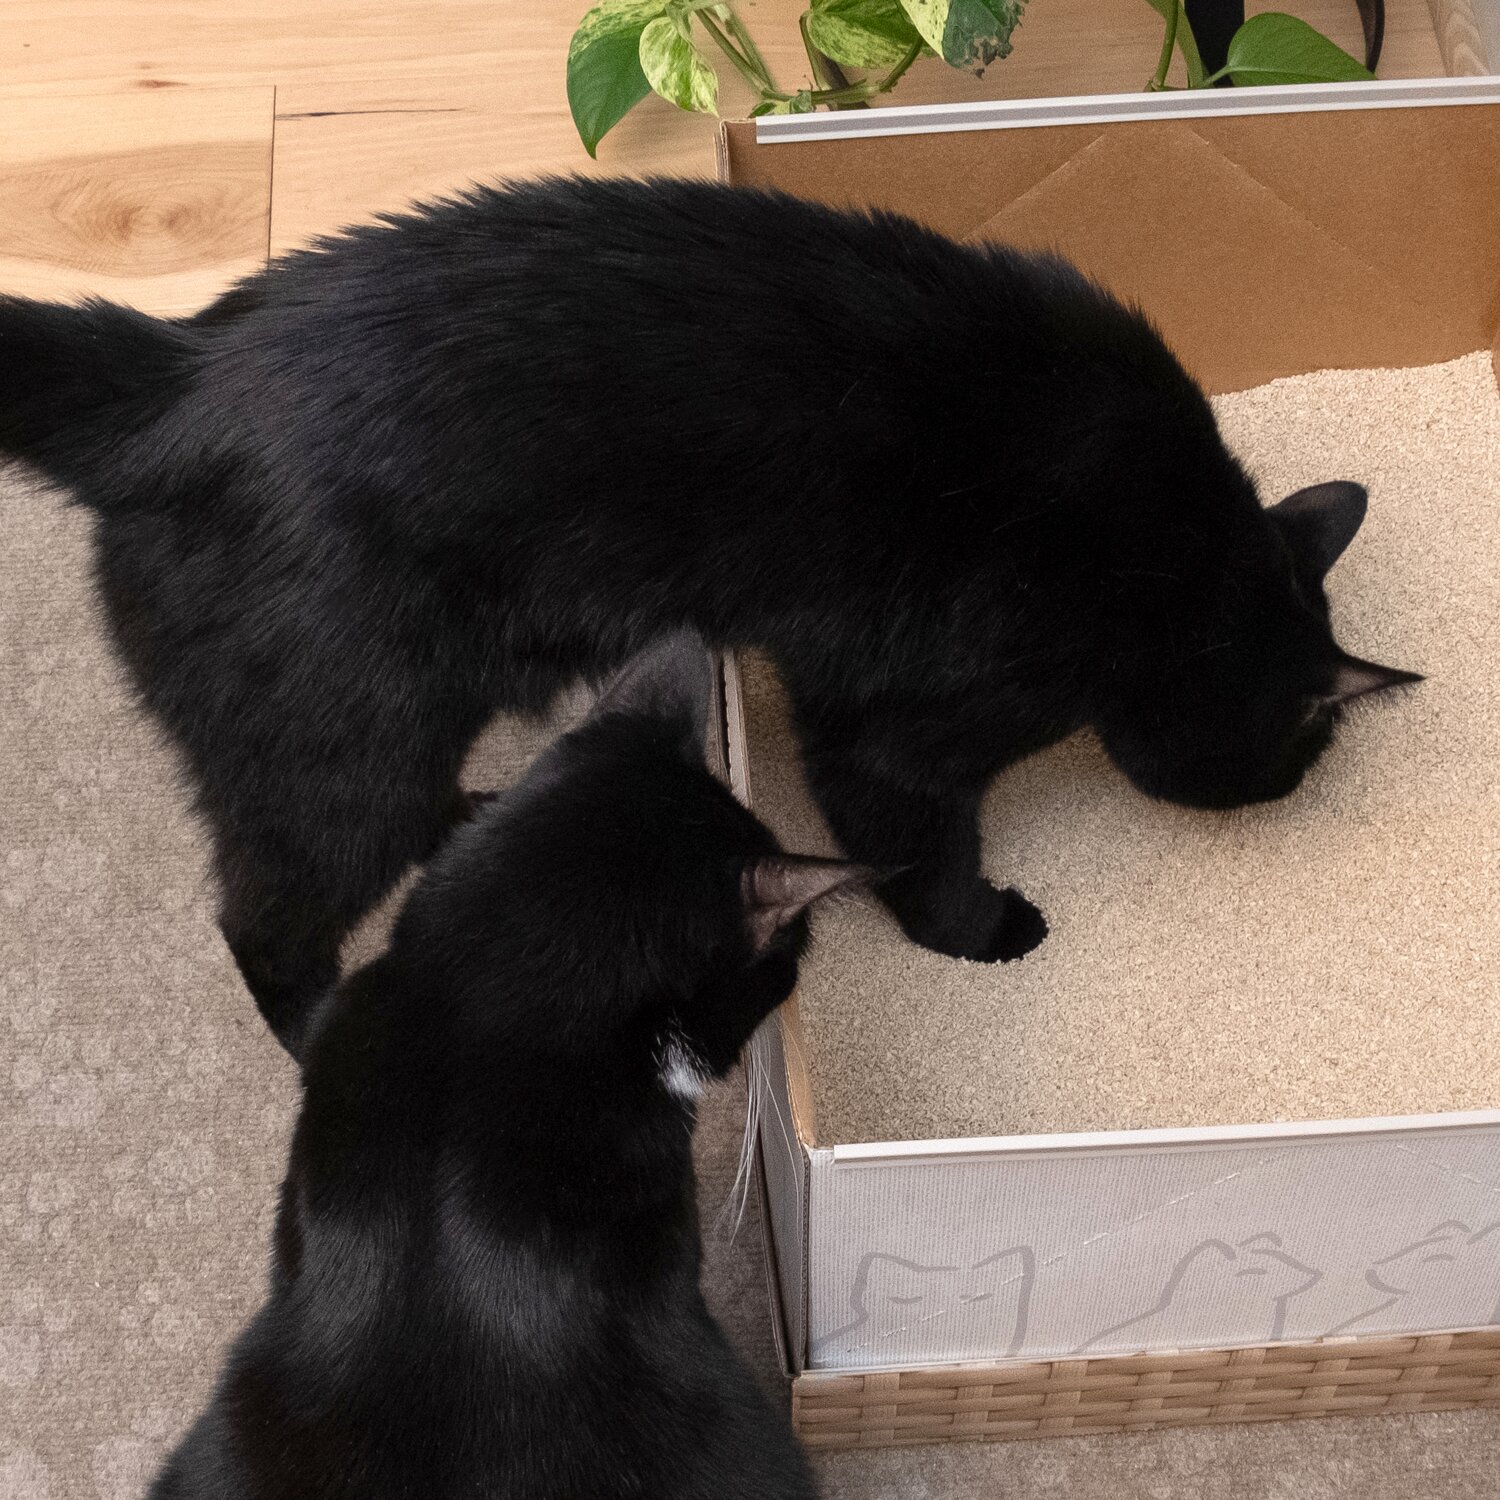 Two black cats finding their way around a Kitty Poo Club disposable litter box filled with Corn & Wheat Litter.